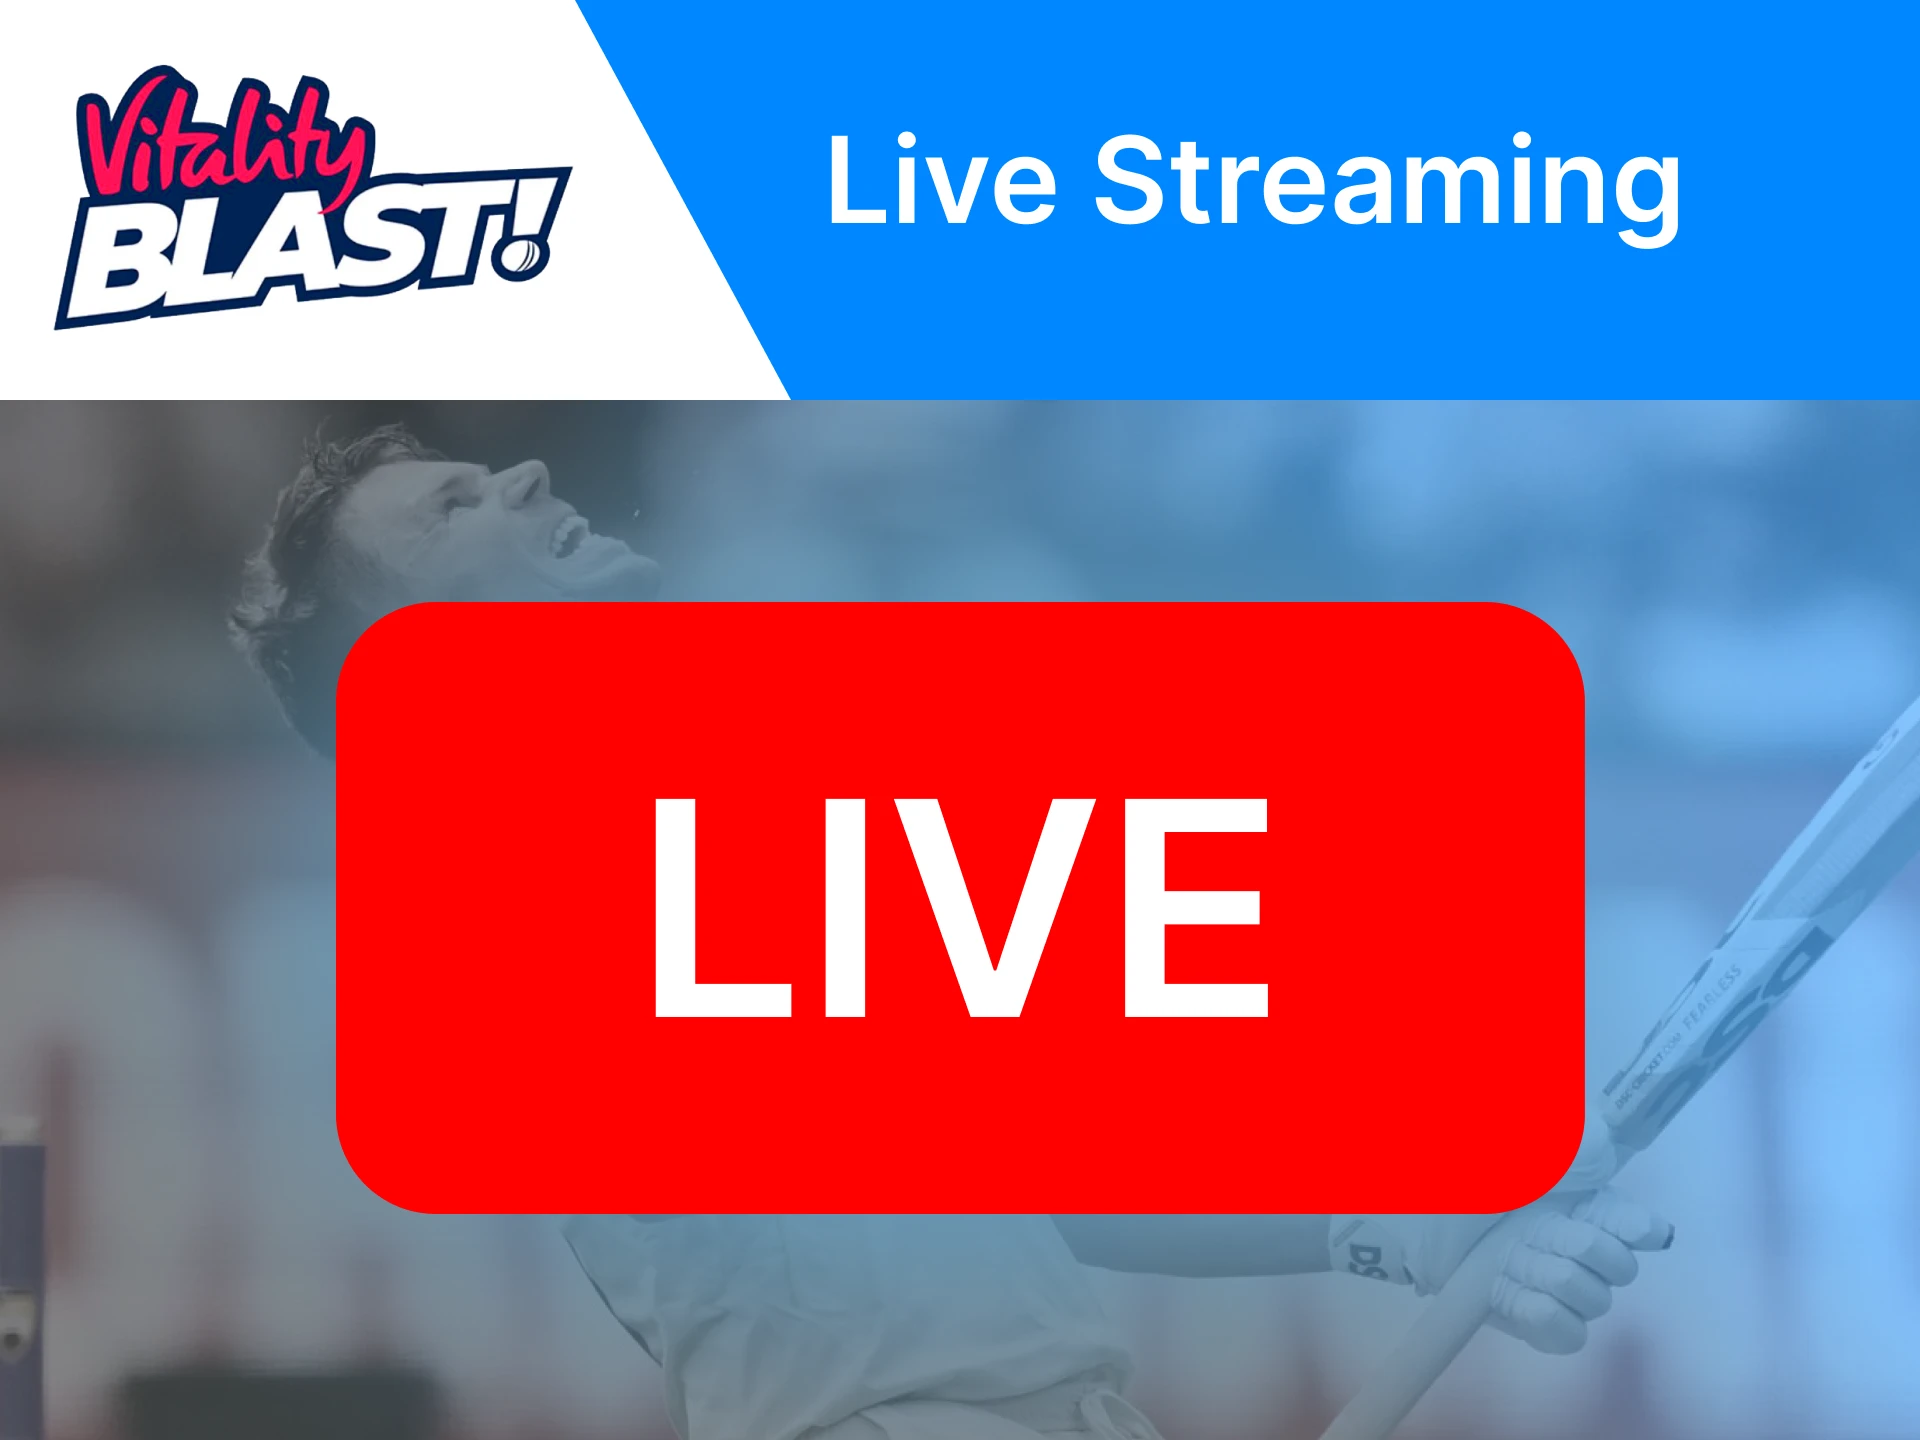 You can watch live streaming of the T20 Blast and make your bets online during a match.